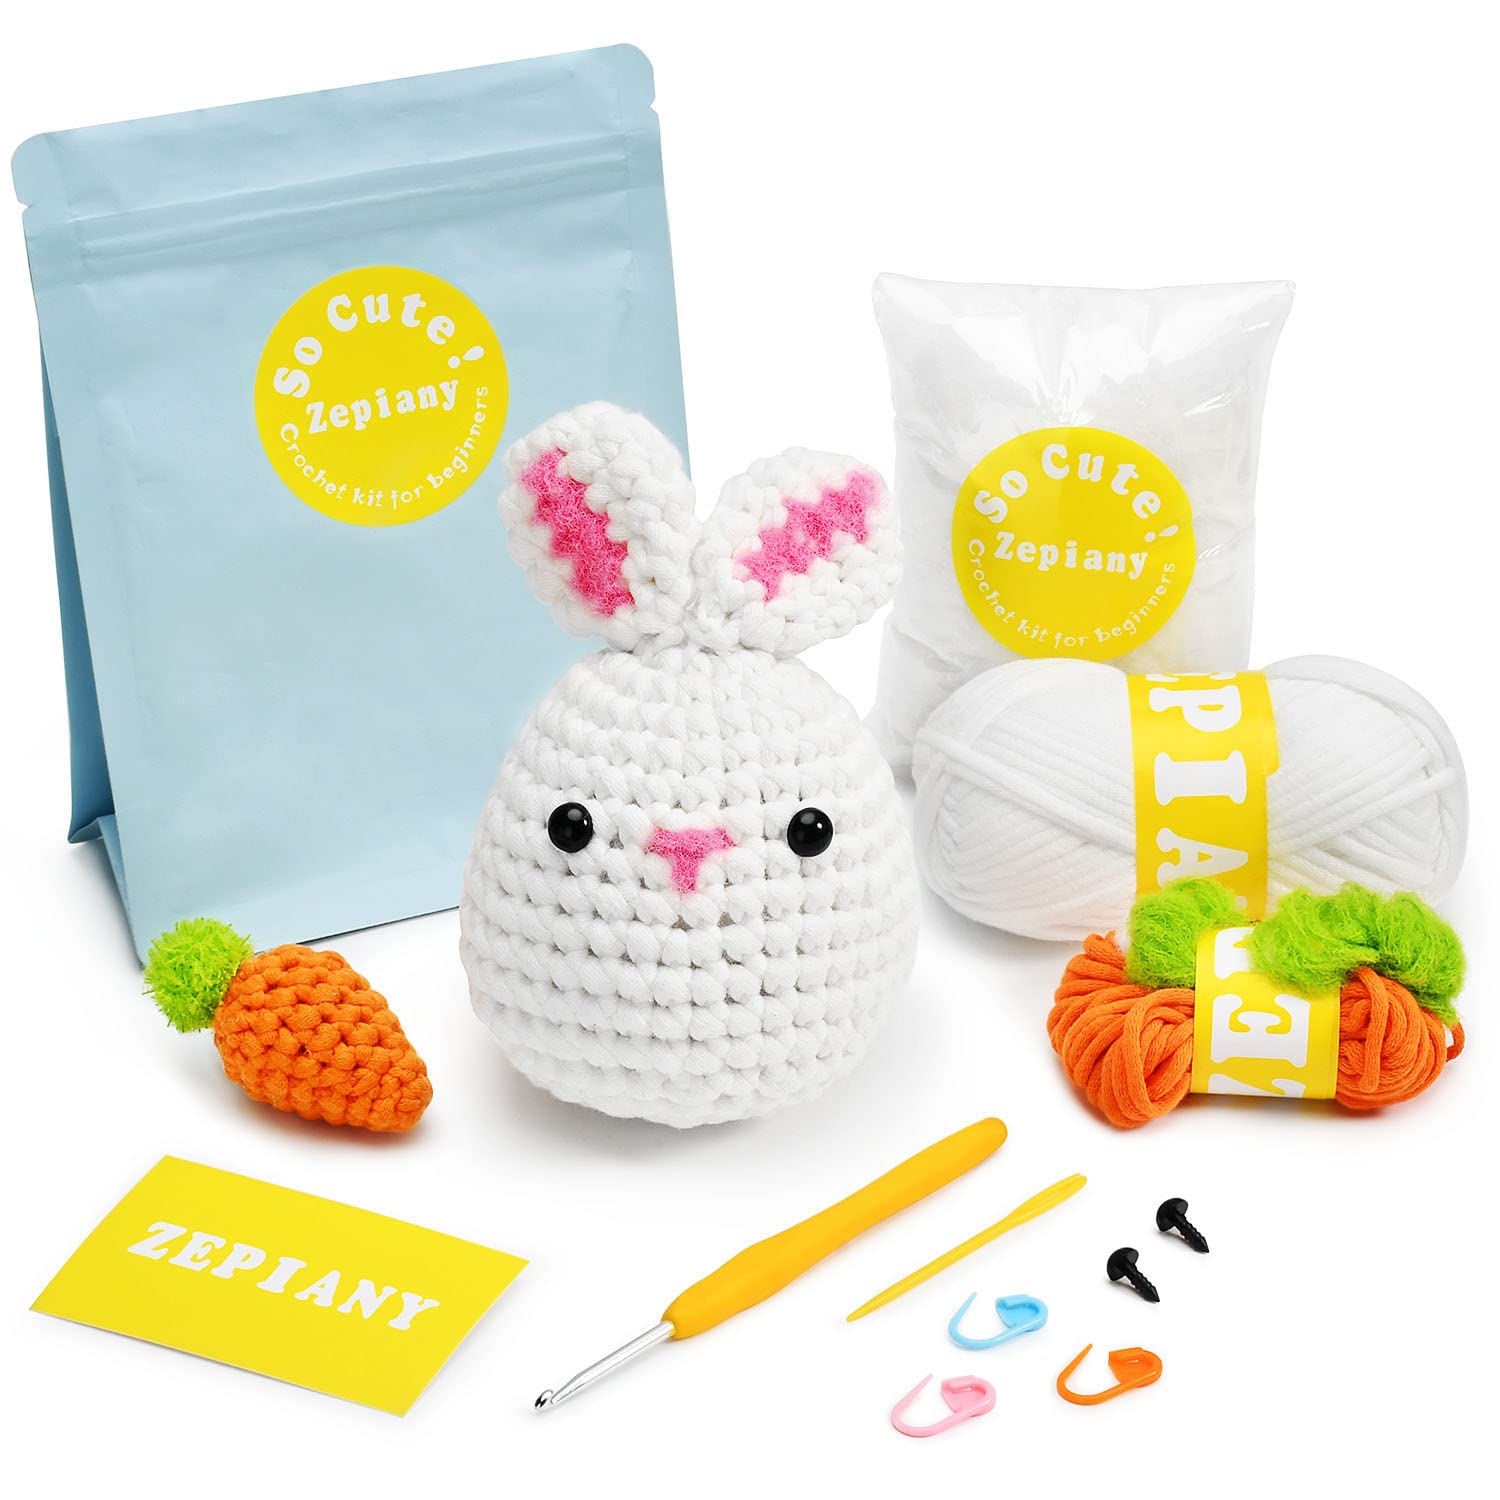 Crochet Kits for Beginners - All-in-One Stuffed Animal Knitting Sets -  Step-by-Step Video Tutorials DIY, Rabbit&Carrot Crochet Kits